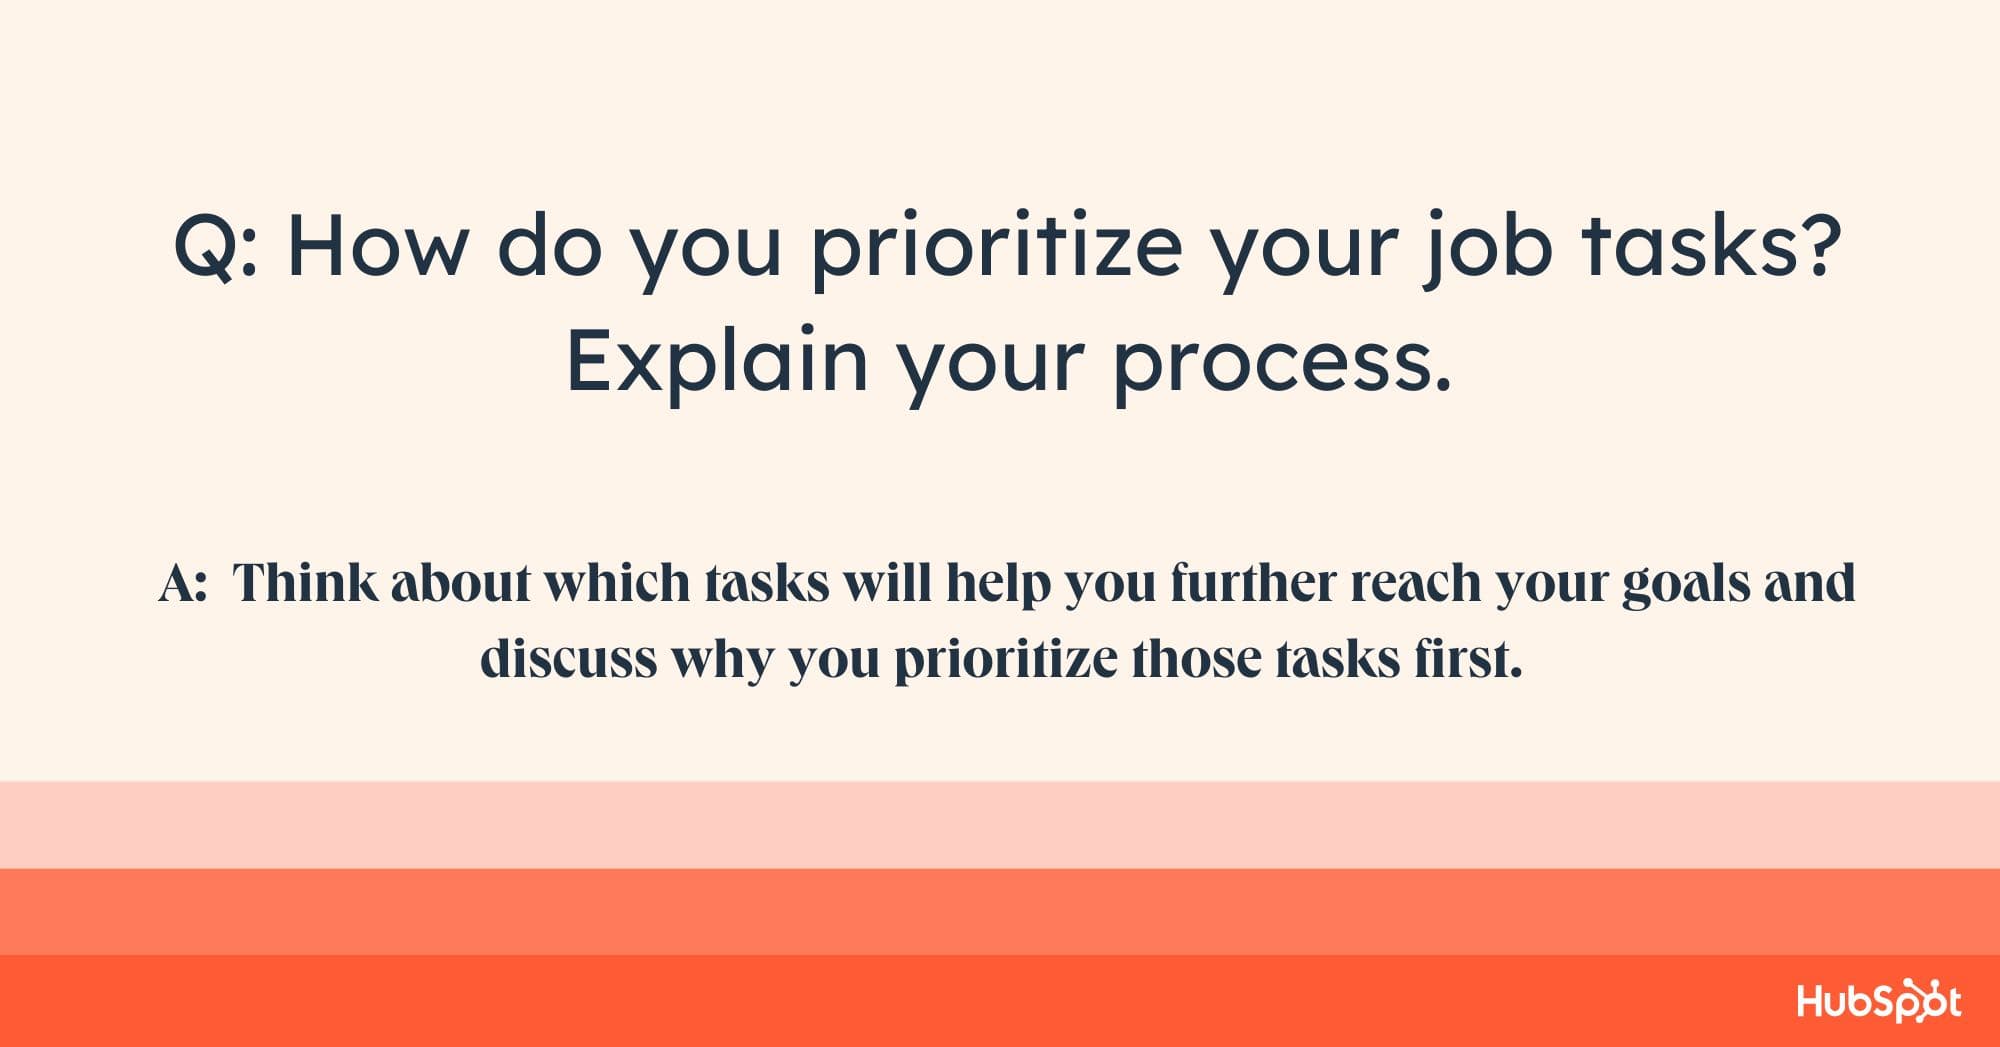 account manager interview questions, Q: How do you prioritize your job tasks? Explain your process. A: Think about which tasks will help you further reach your goals and discuss why you prioritize those tasks first.